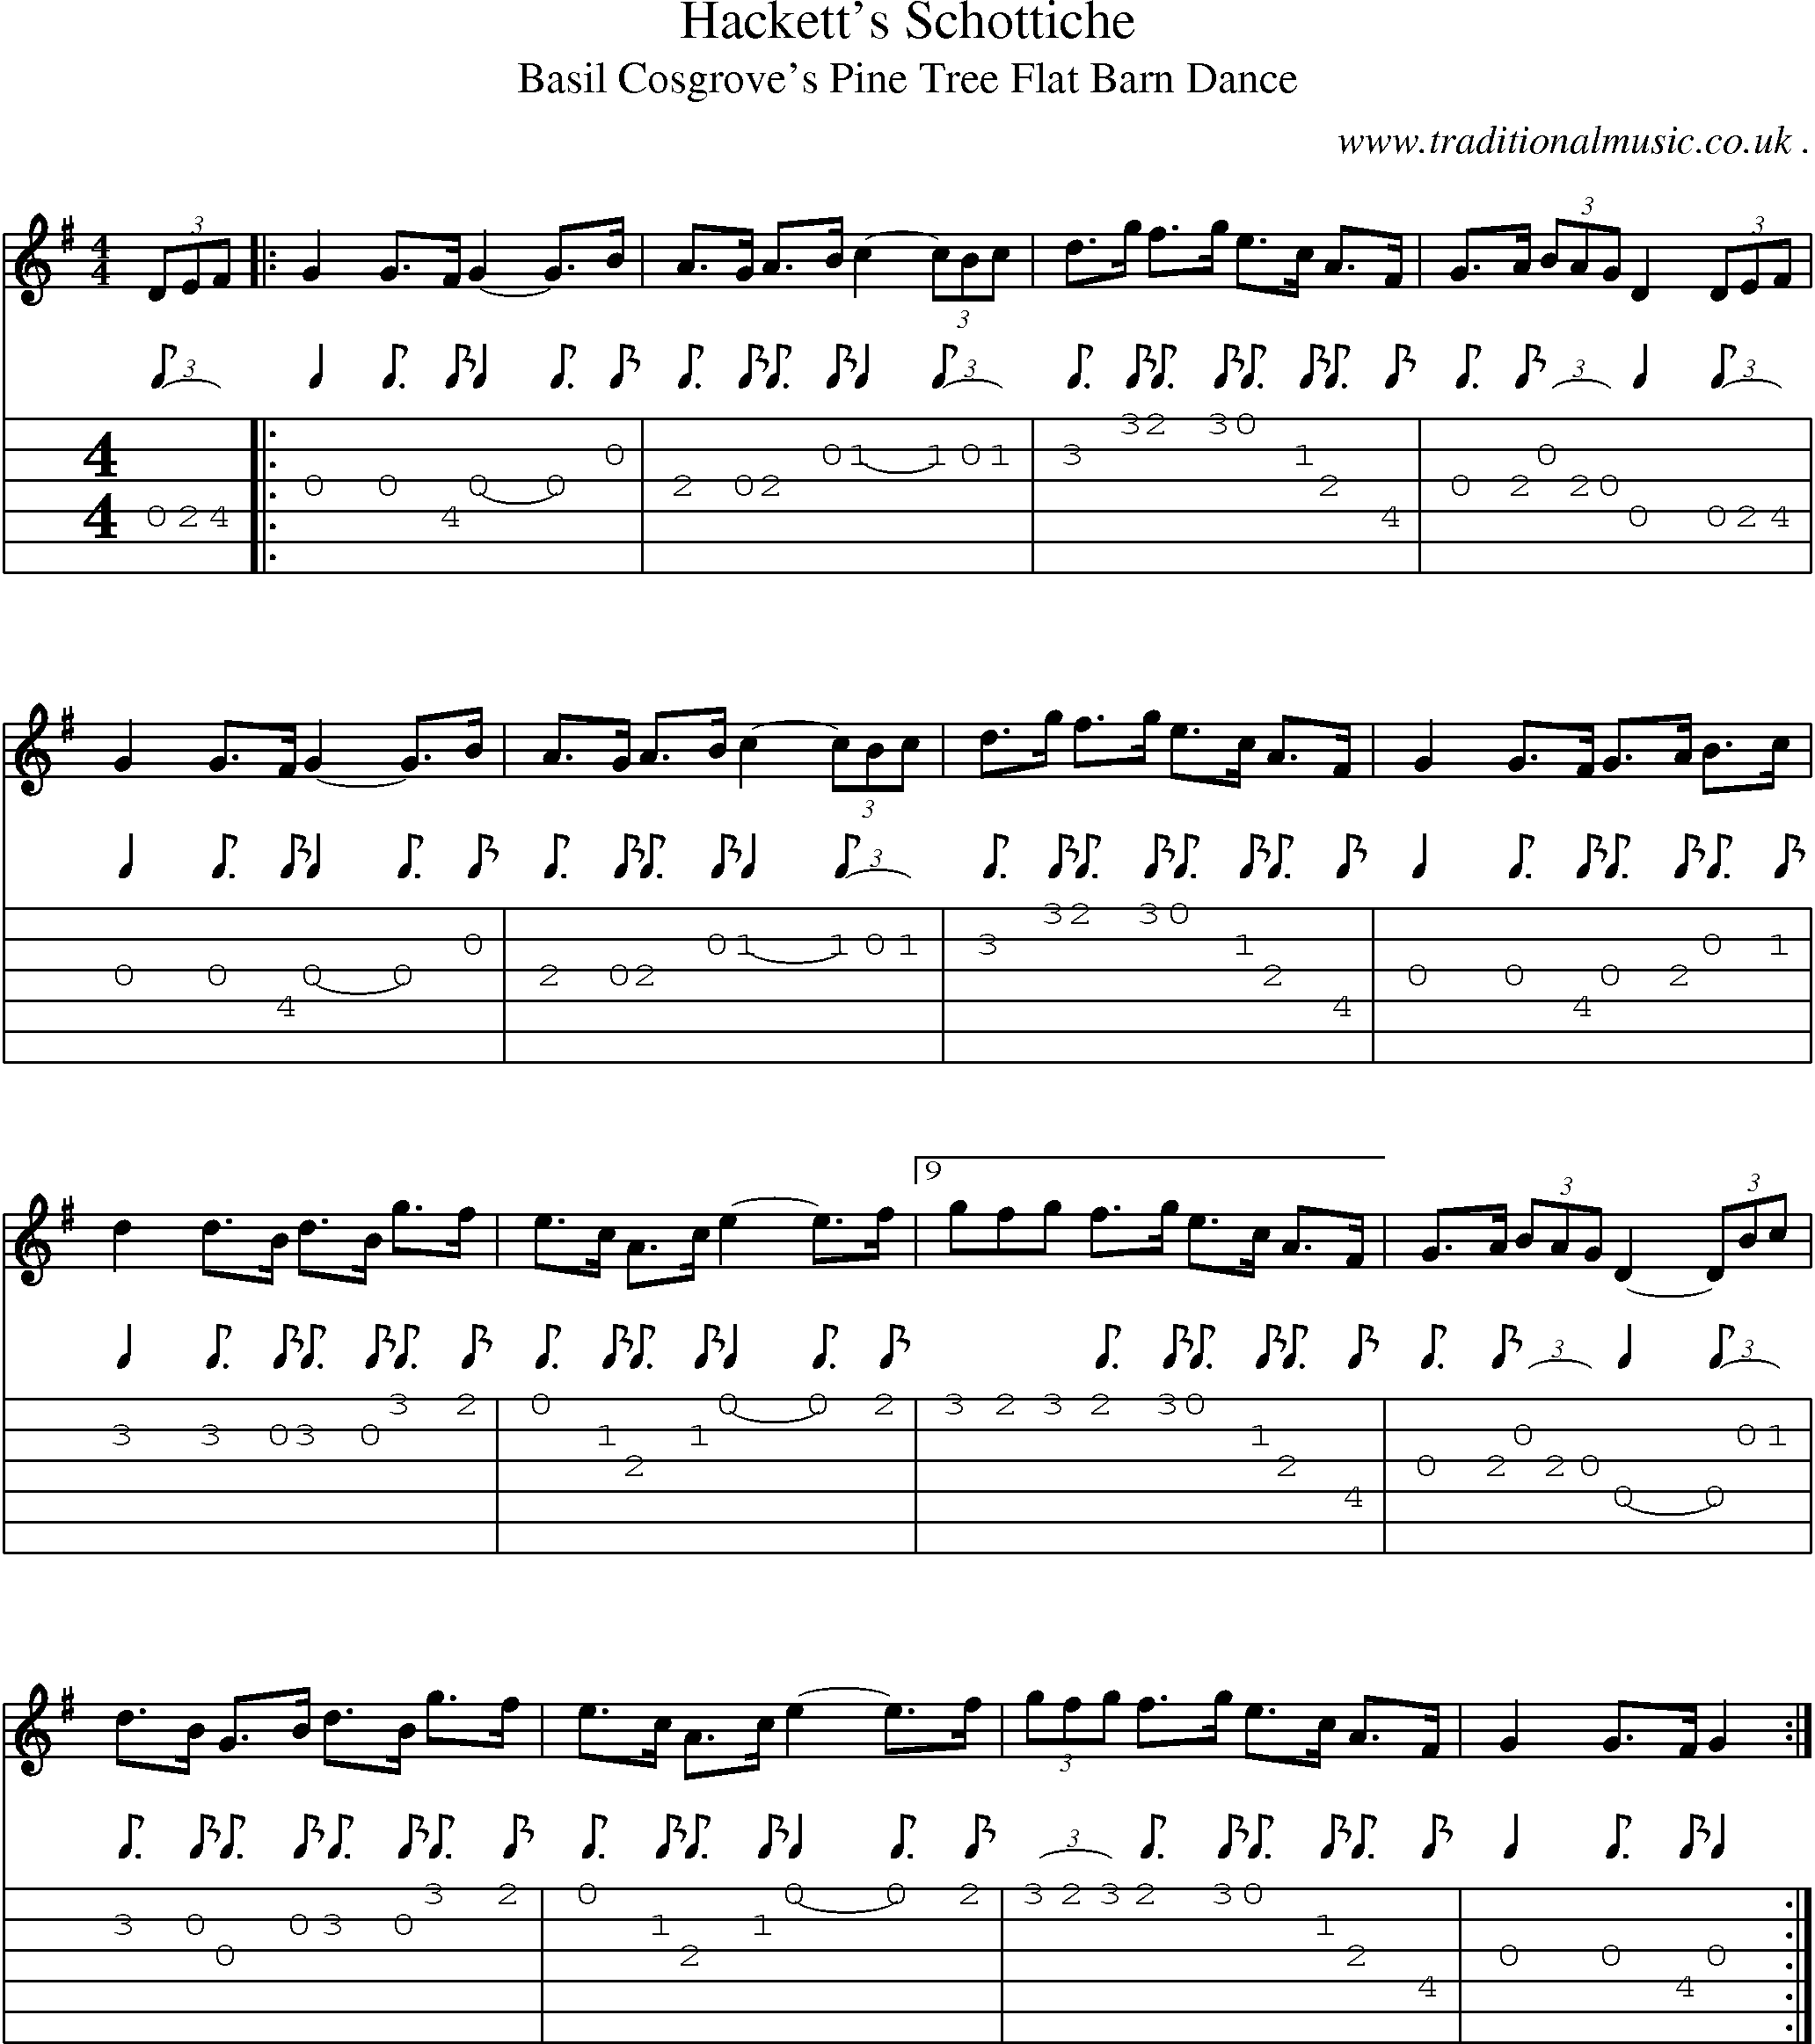 Sheet-Music and Guitar Tabs for Hacketts Schottiche